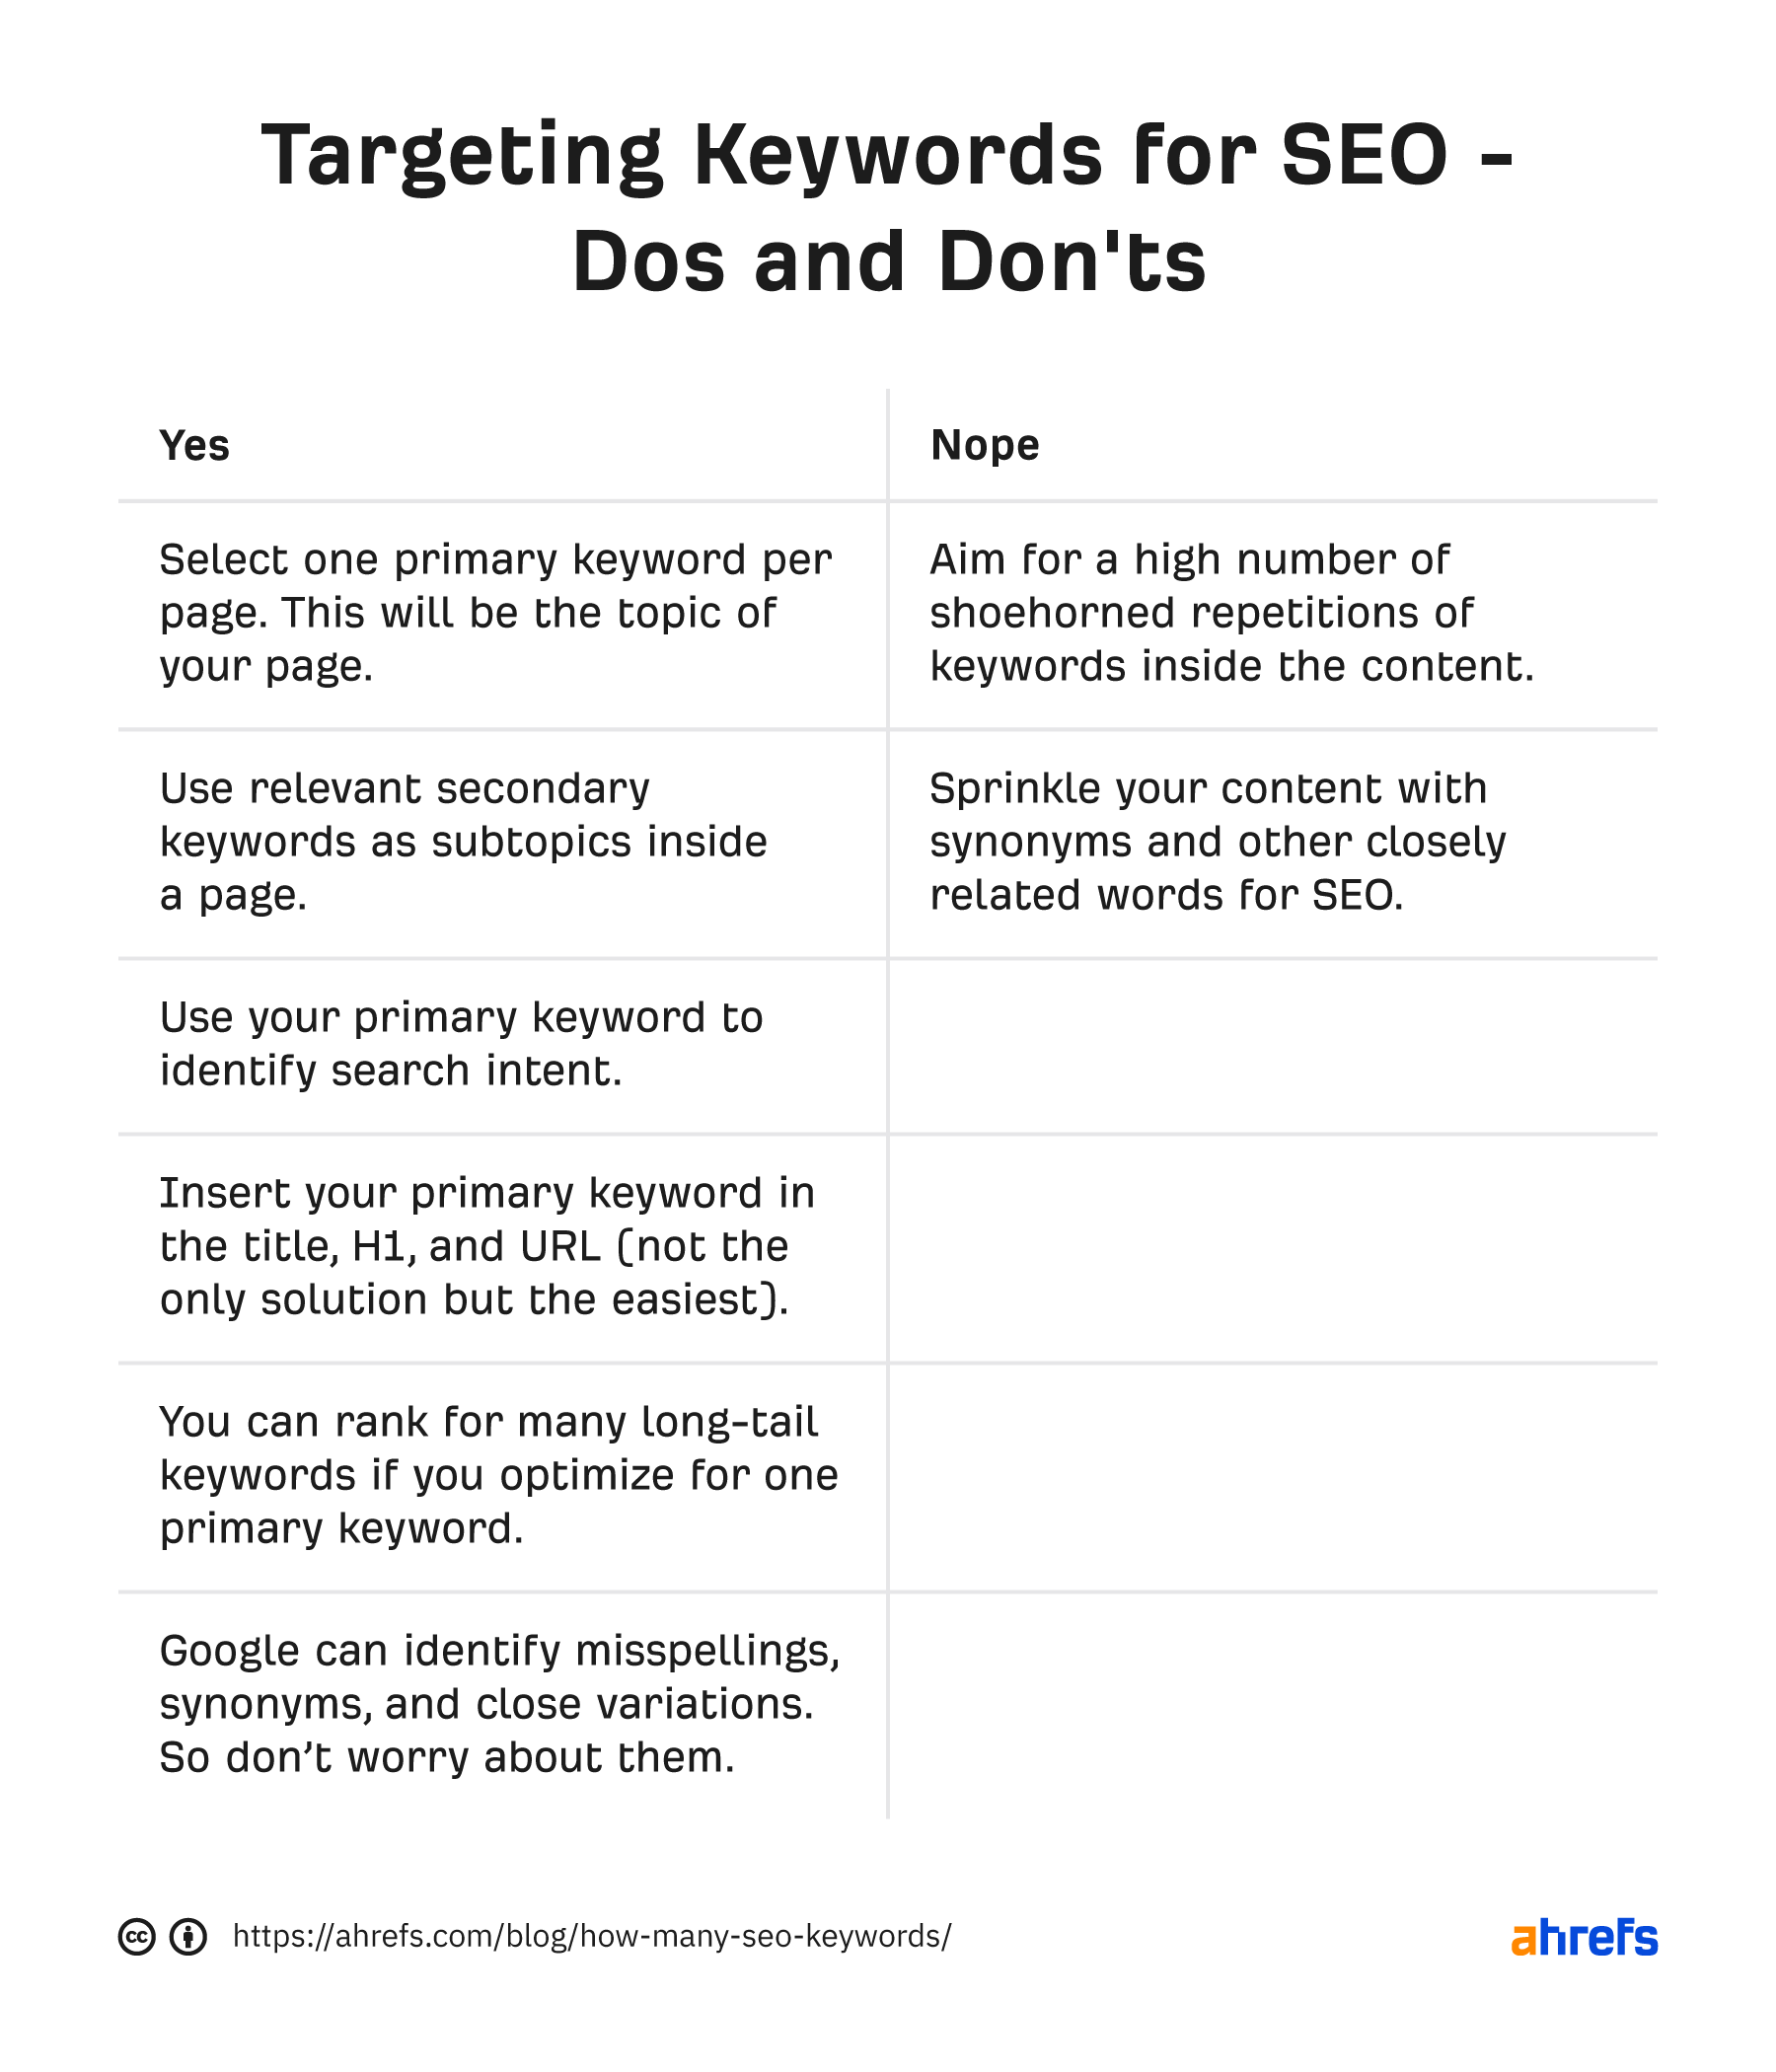 Table of dos and don'ts when targeting keywords for SEO